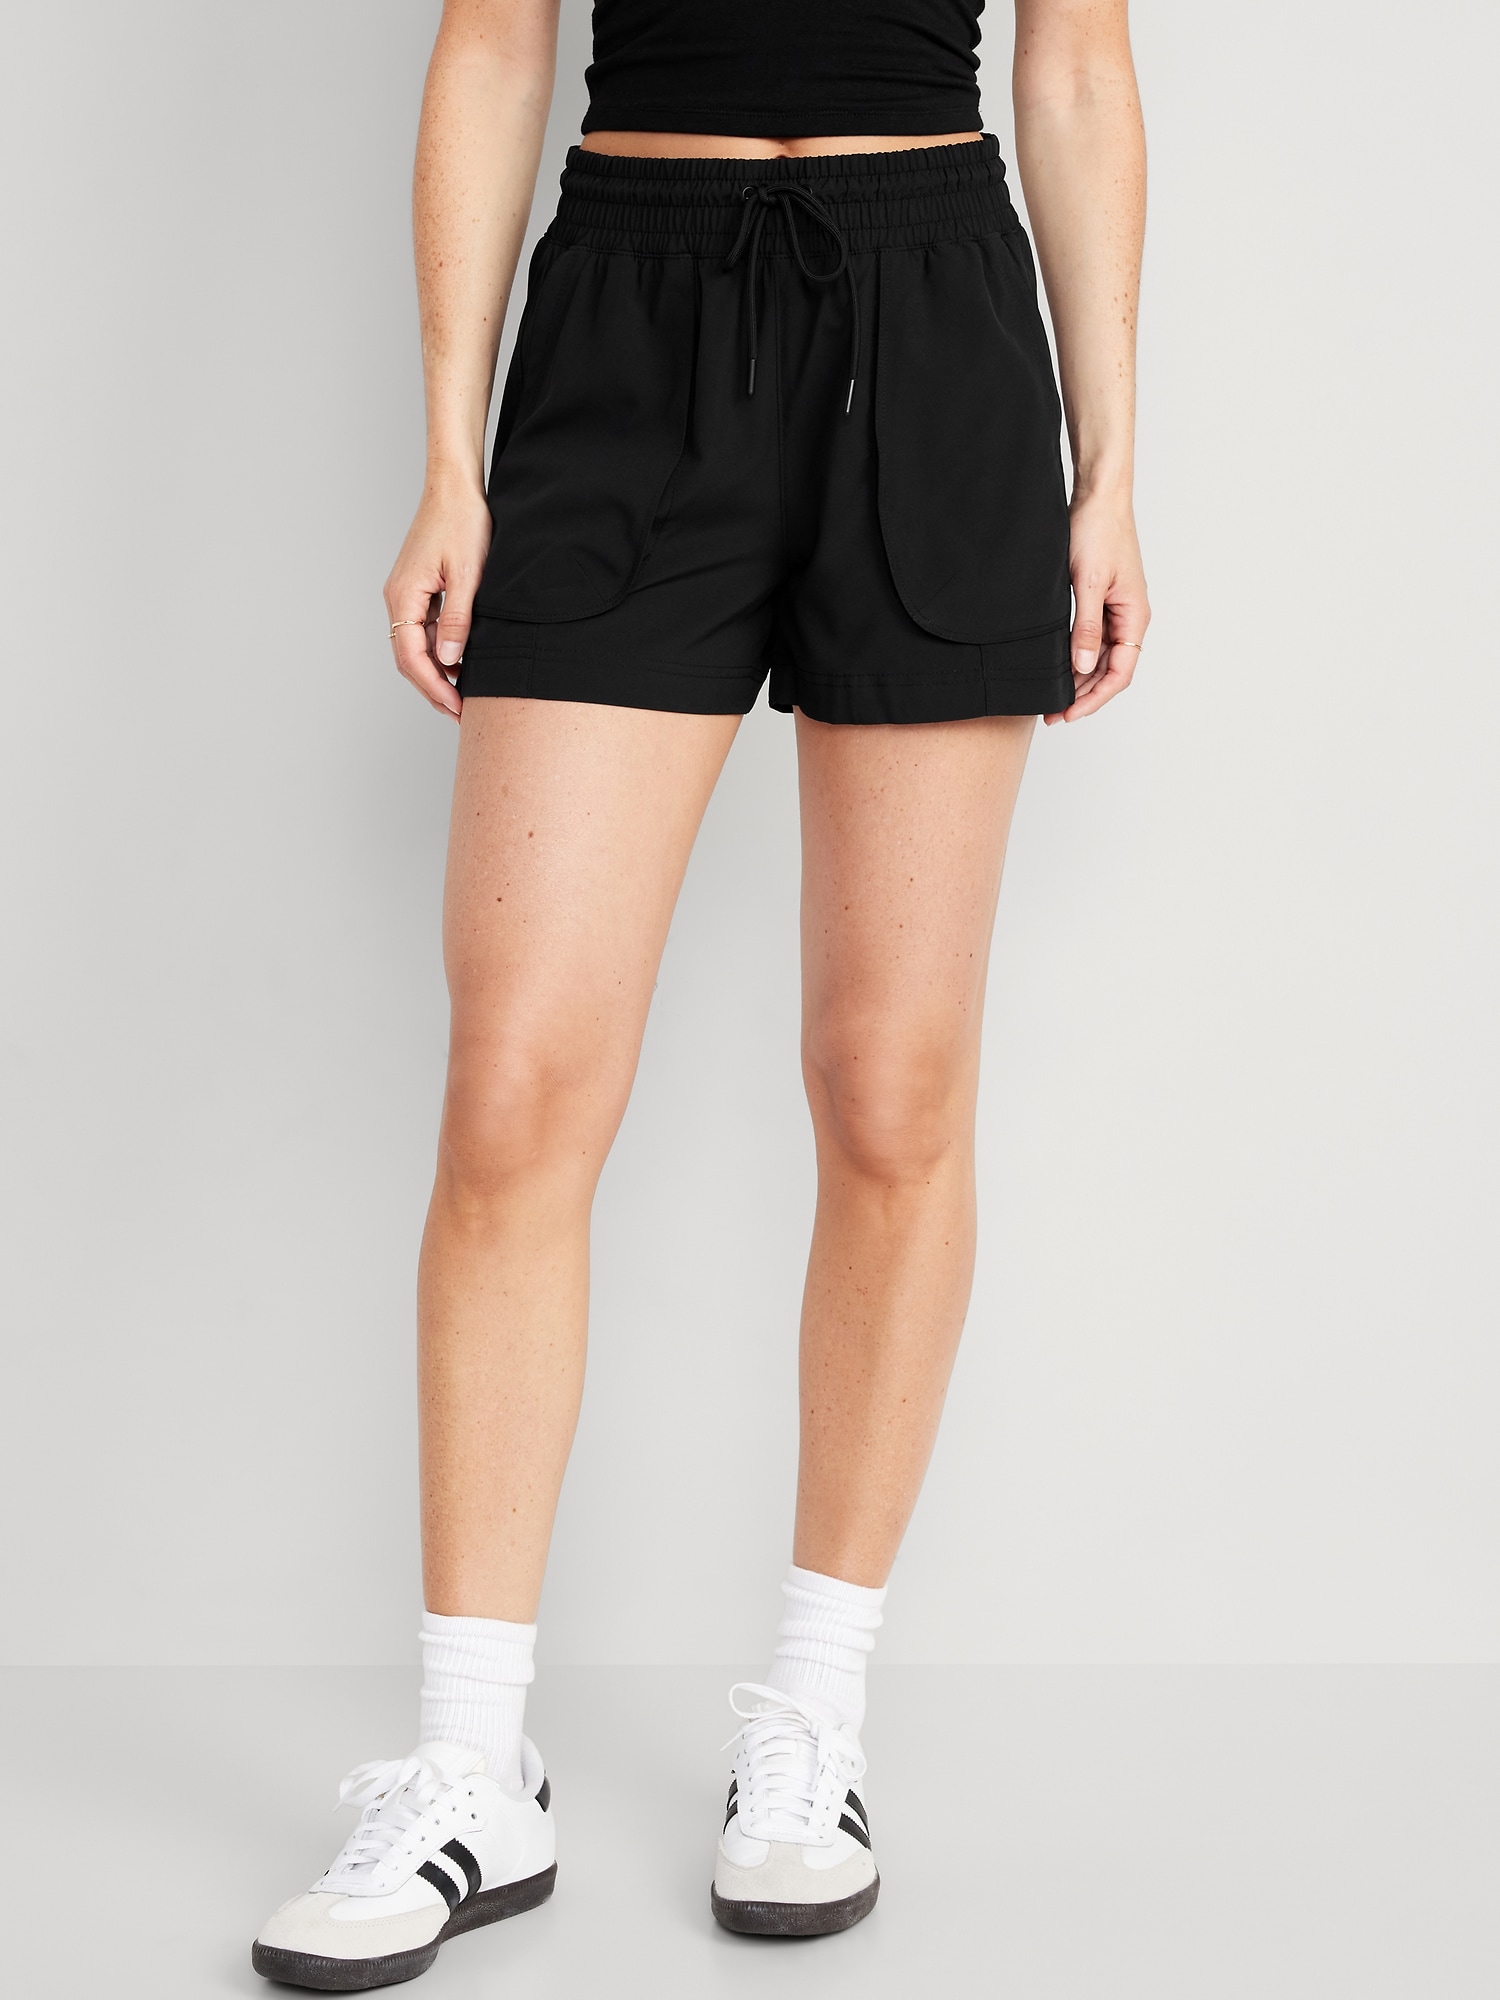 Old Navy Women's High-Waisted StretchTech Shorts -- 4-inch inseam